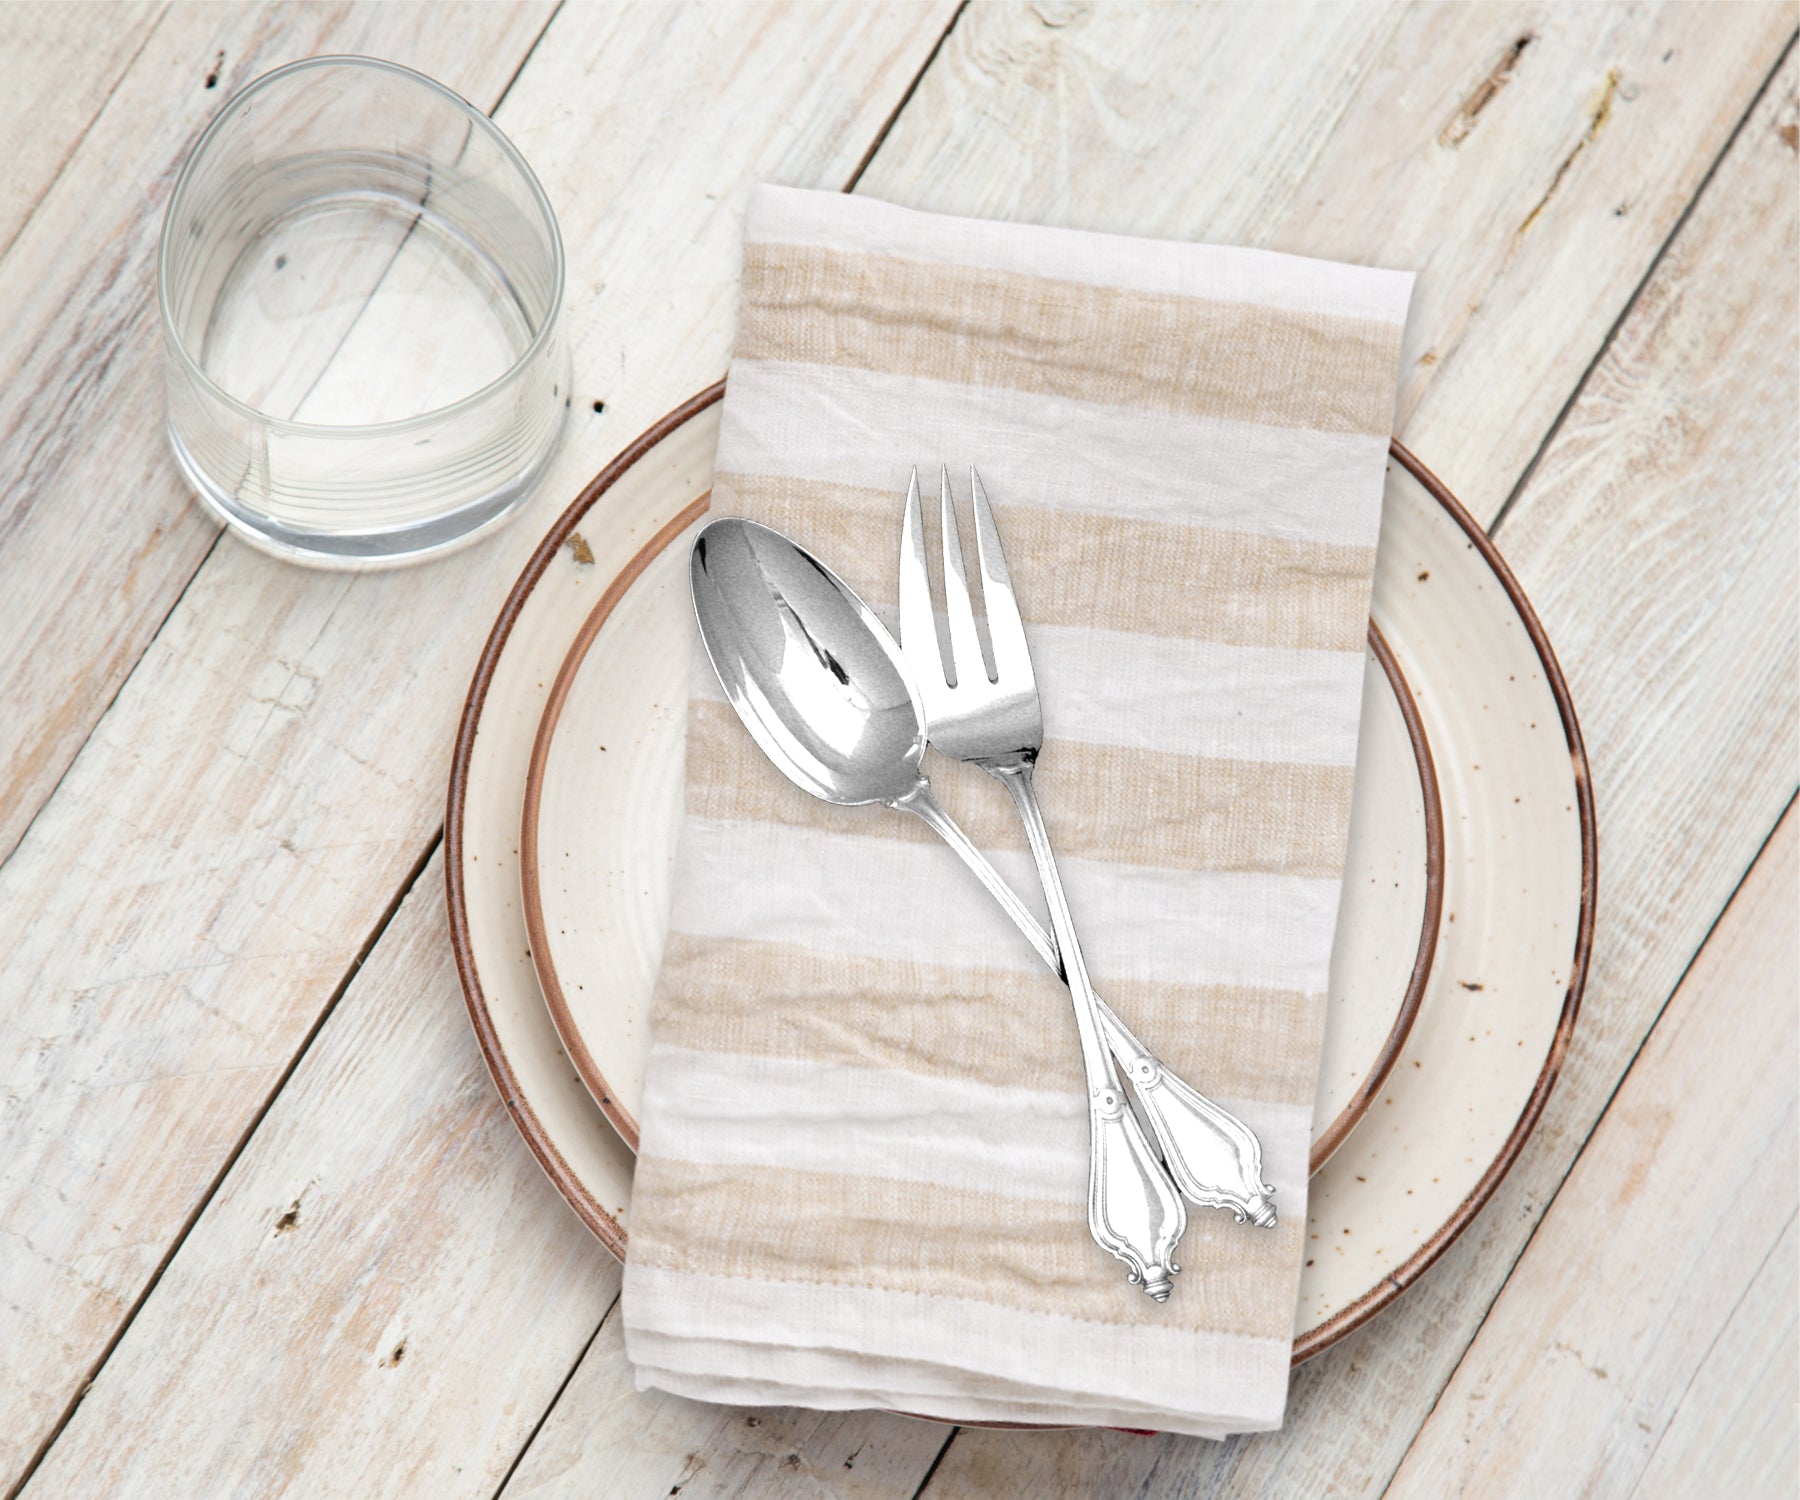 Premium linen napkins ideal for special occasions, providing an elegant touch to your table.